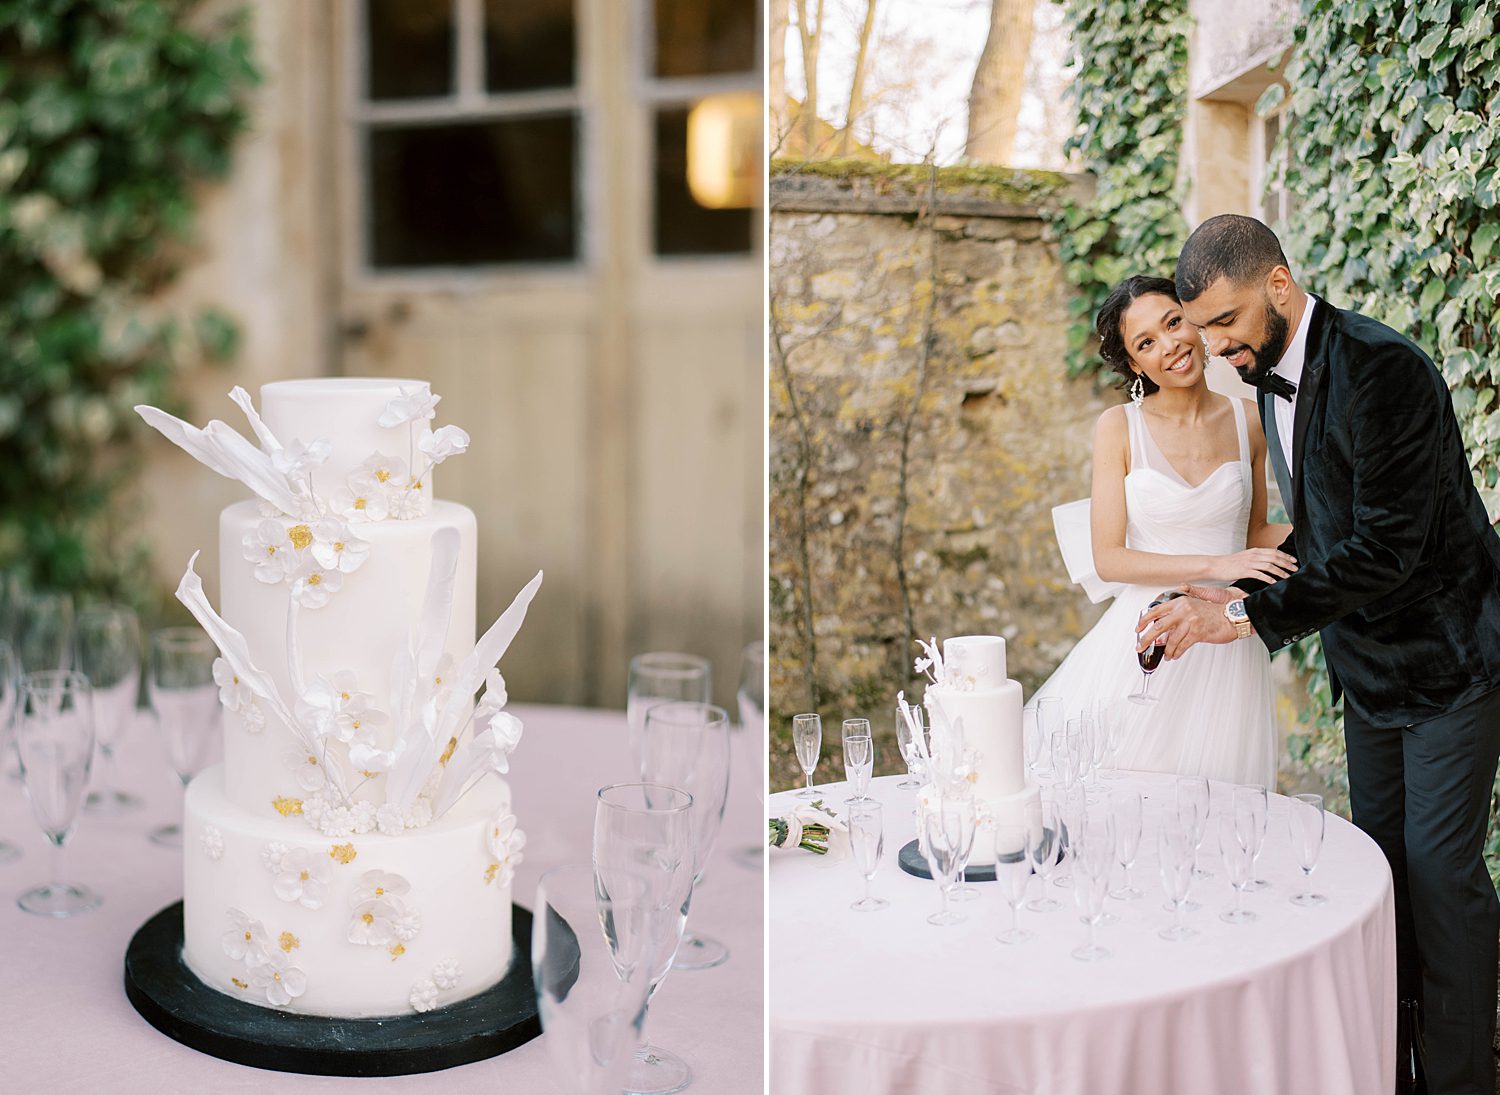 bride and groom cut wedding cake photographed by Paris wedding photographer